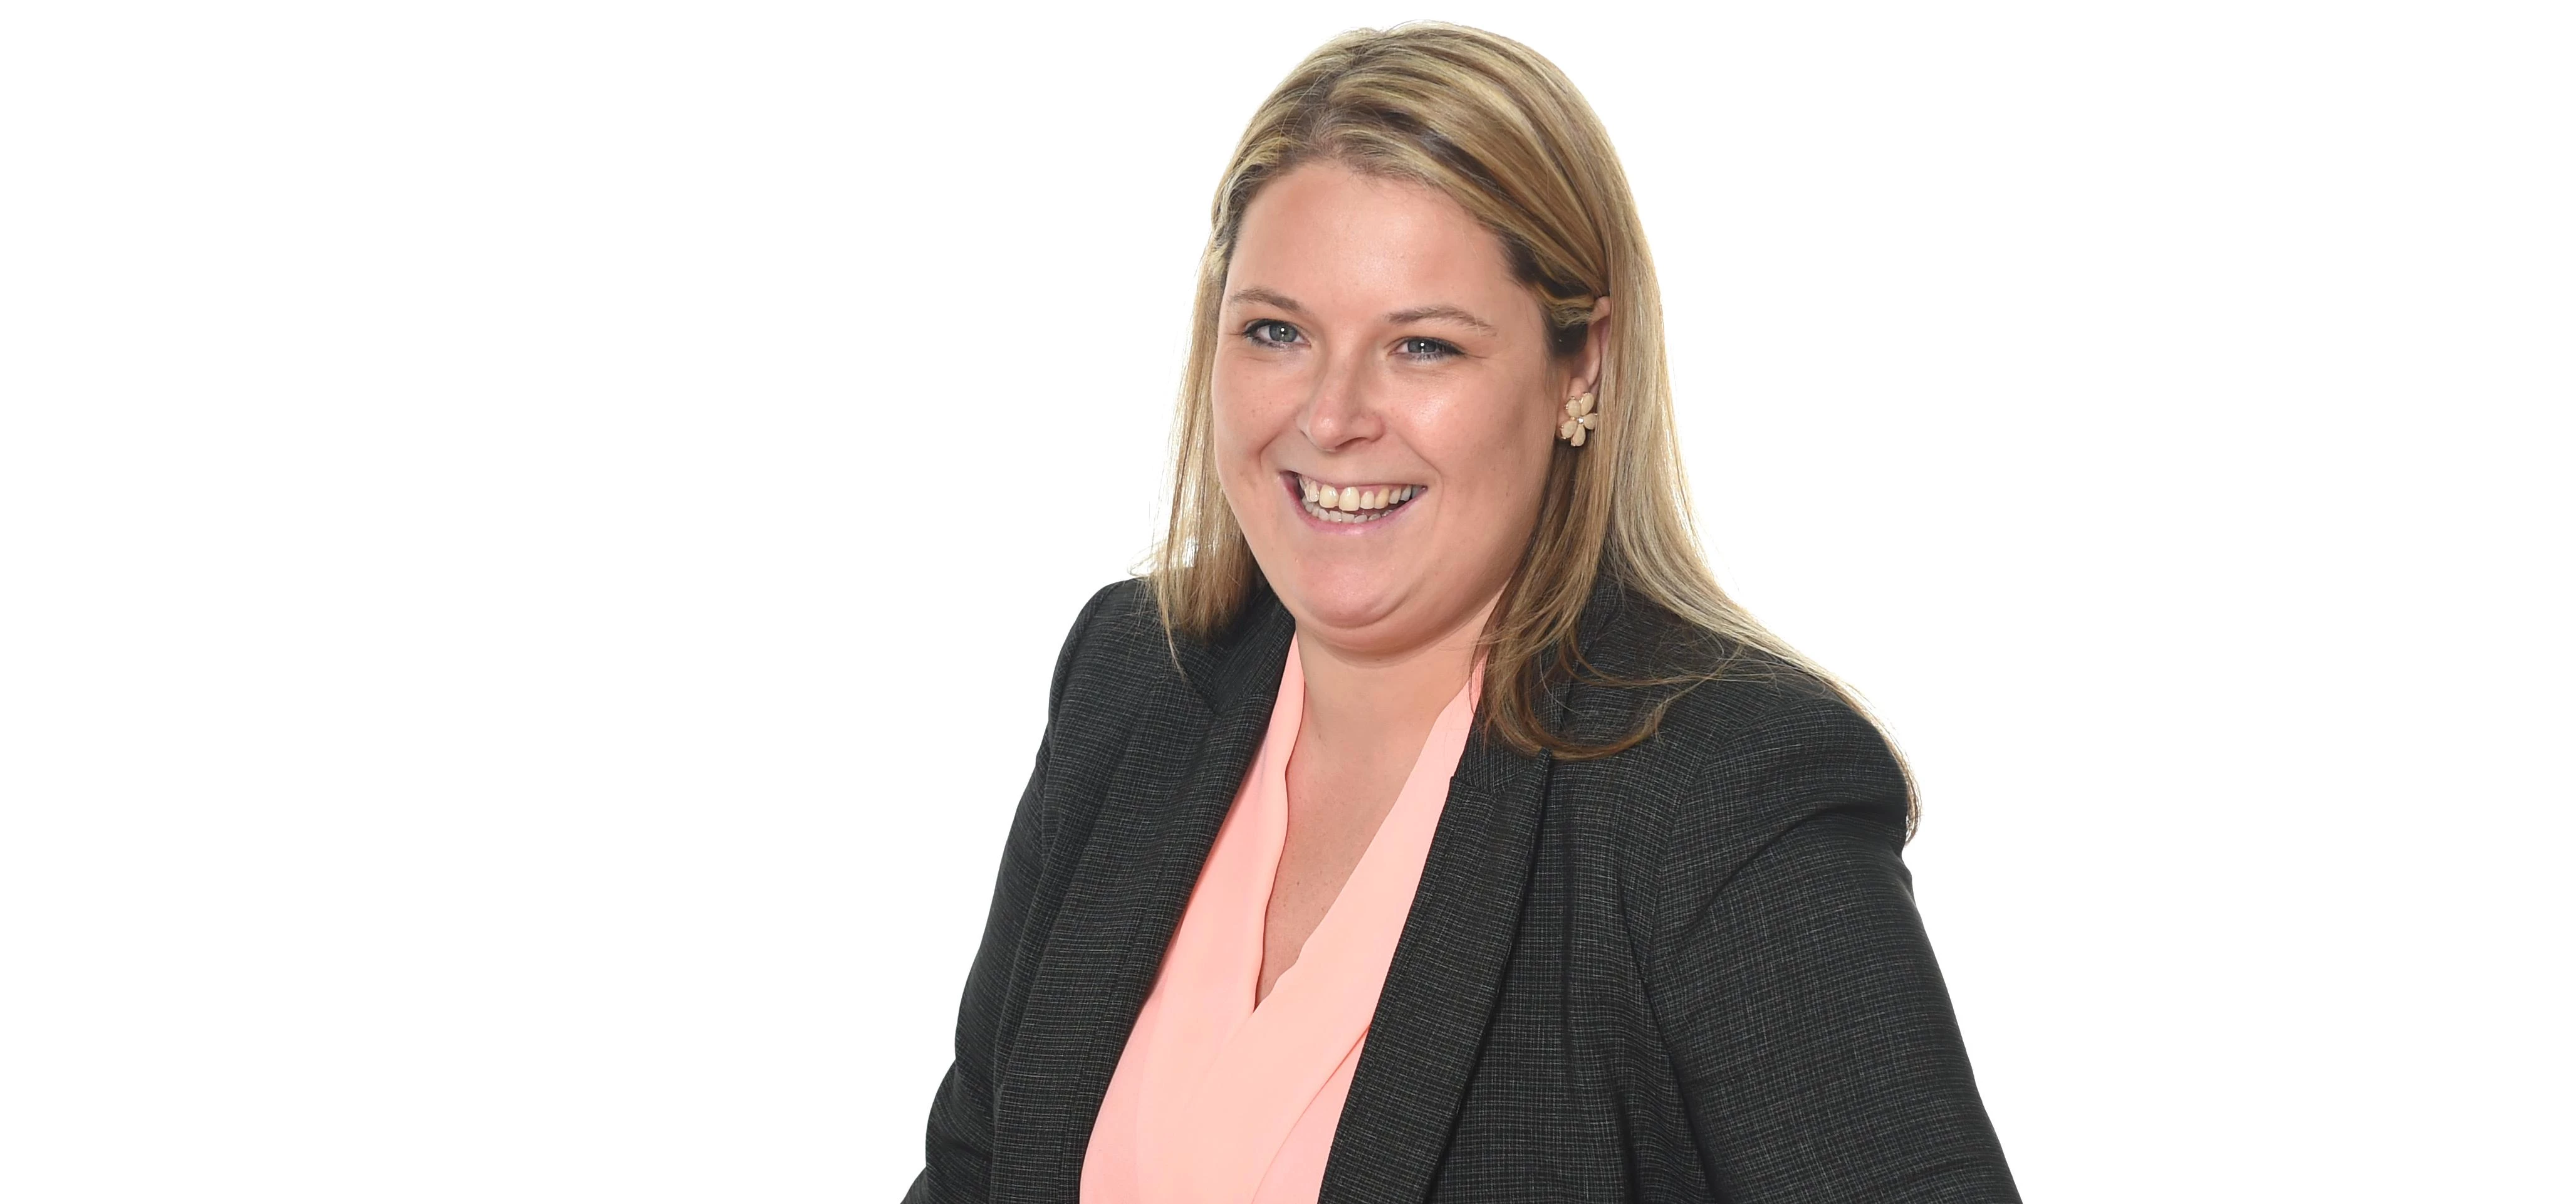 Free auto enrolment advice from Lisa Kennery, payroll manager at Pierce Group